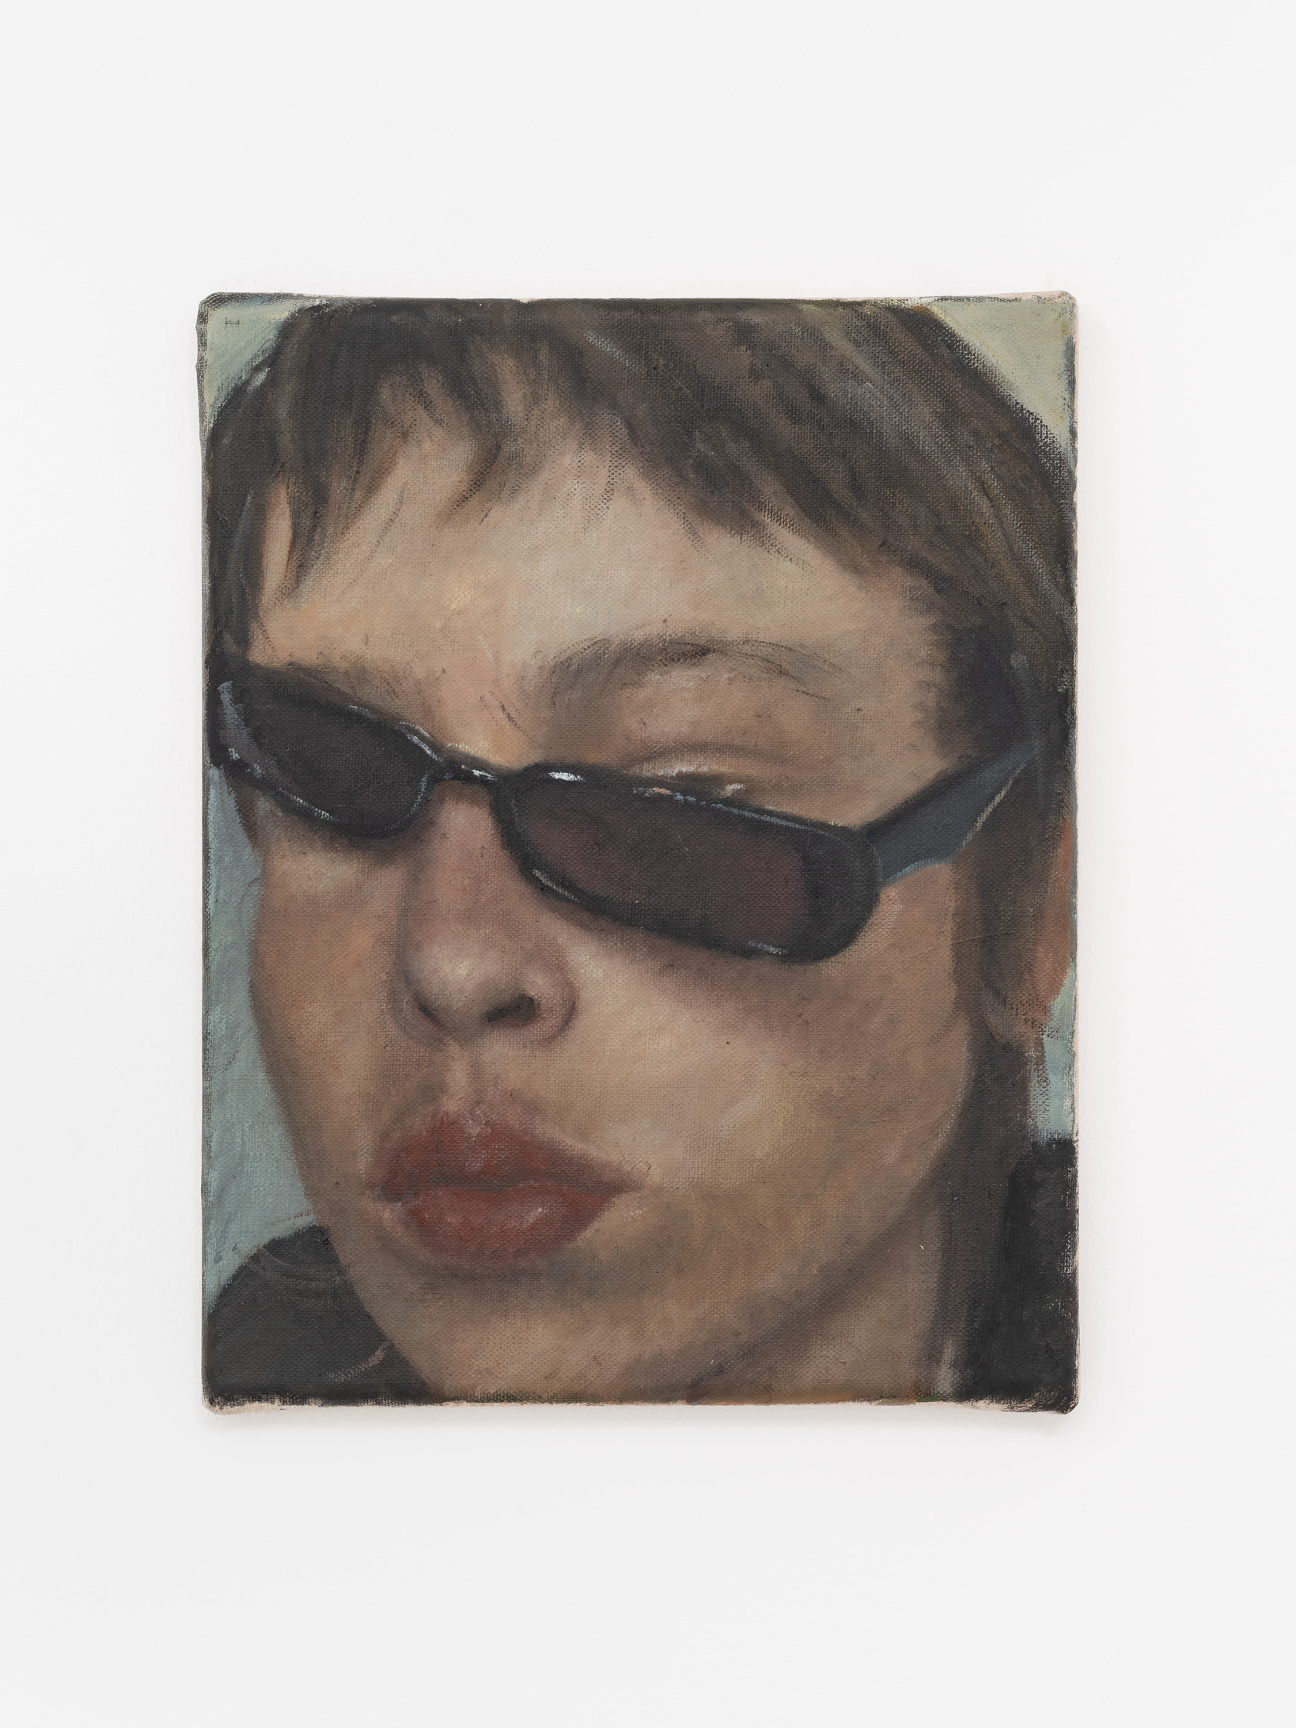 A self-portrait of artist Issy Wood with sunglasses hanging off her face.